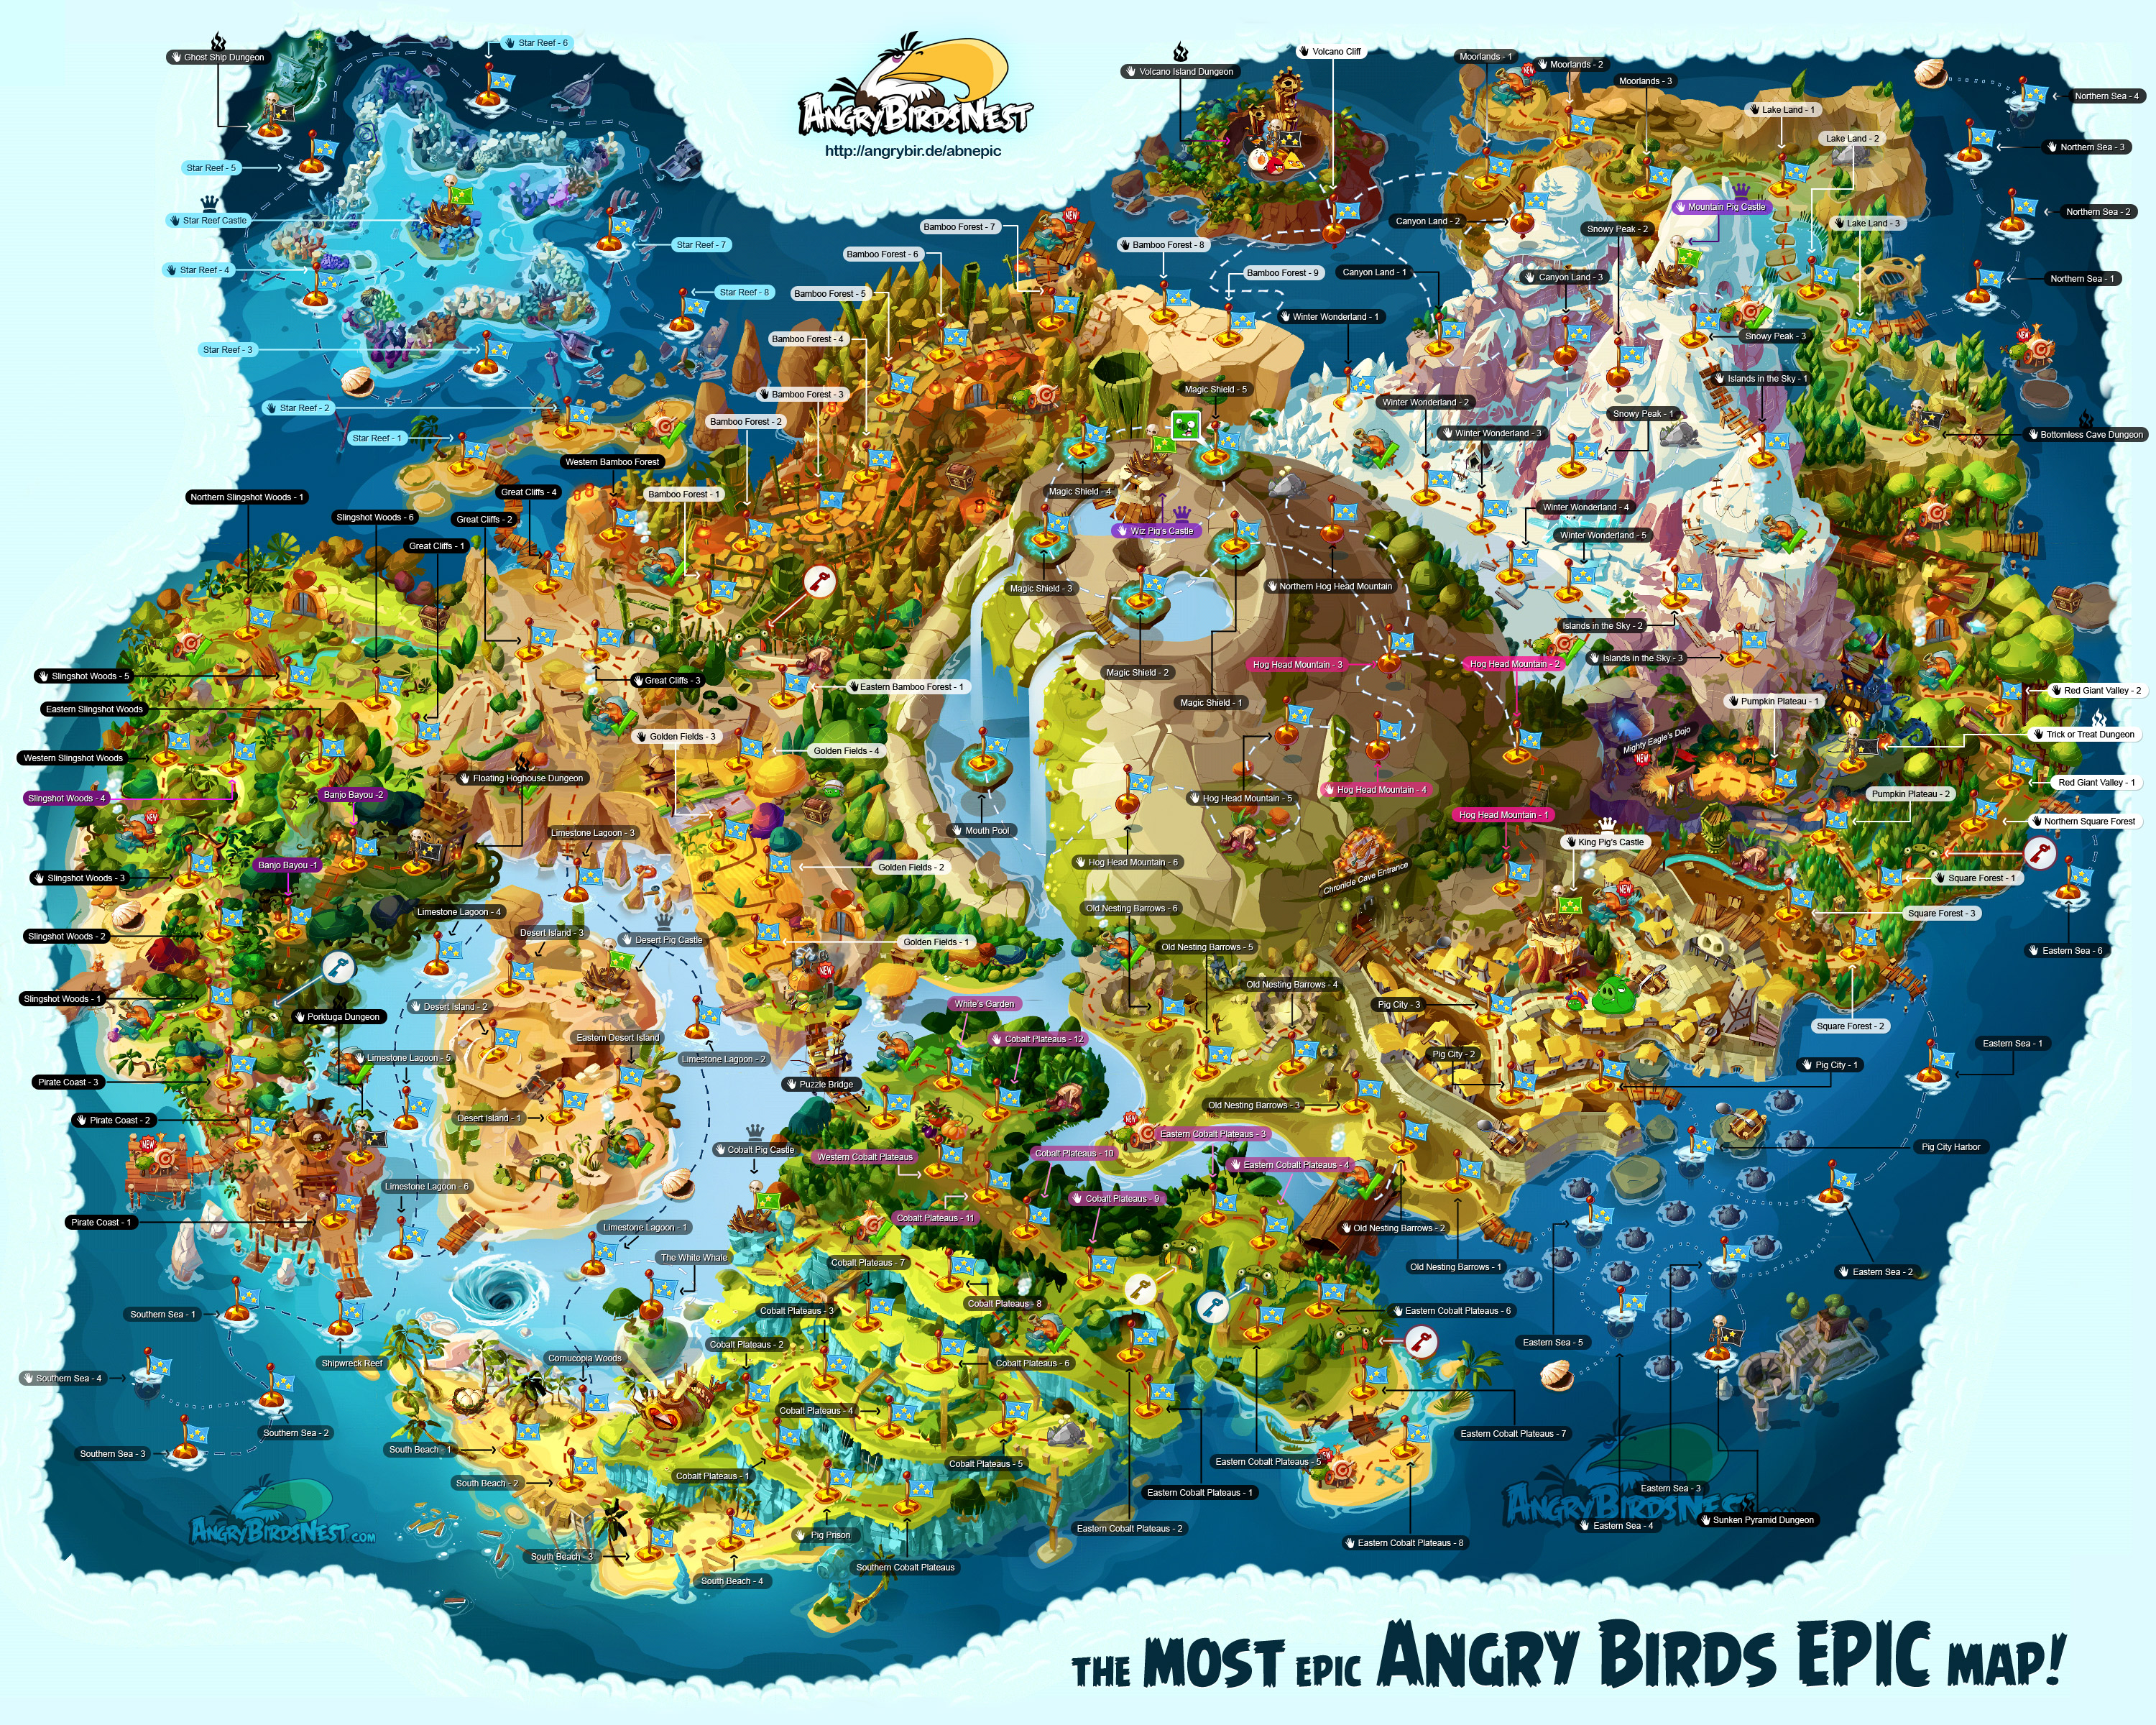 Dawn of Piggy Island – a tweaked version of Epic